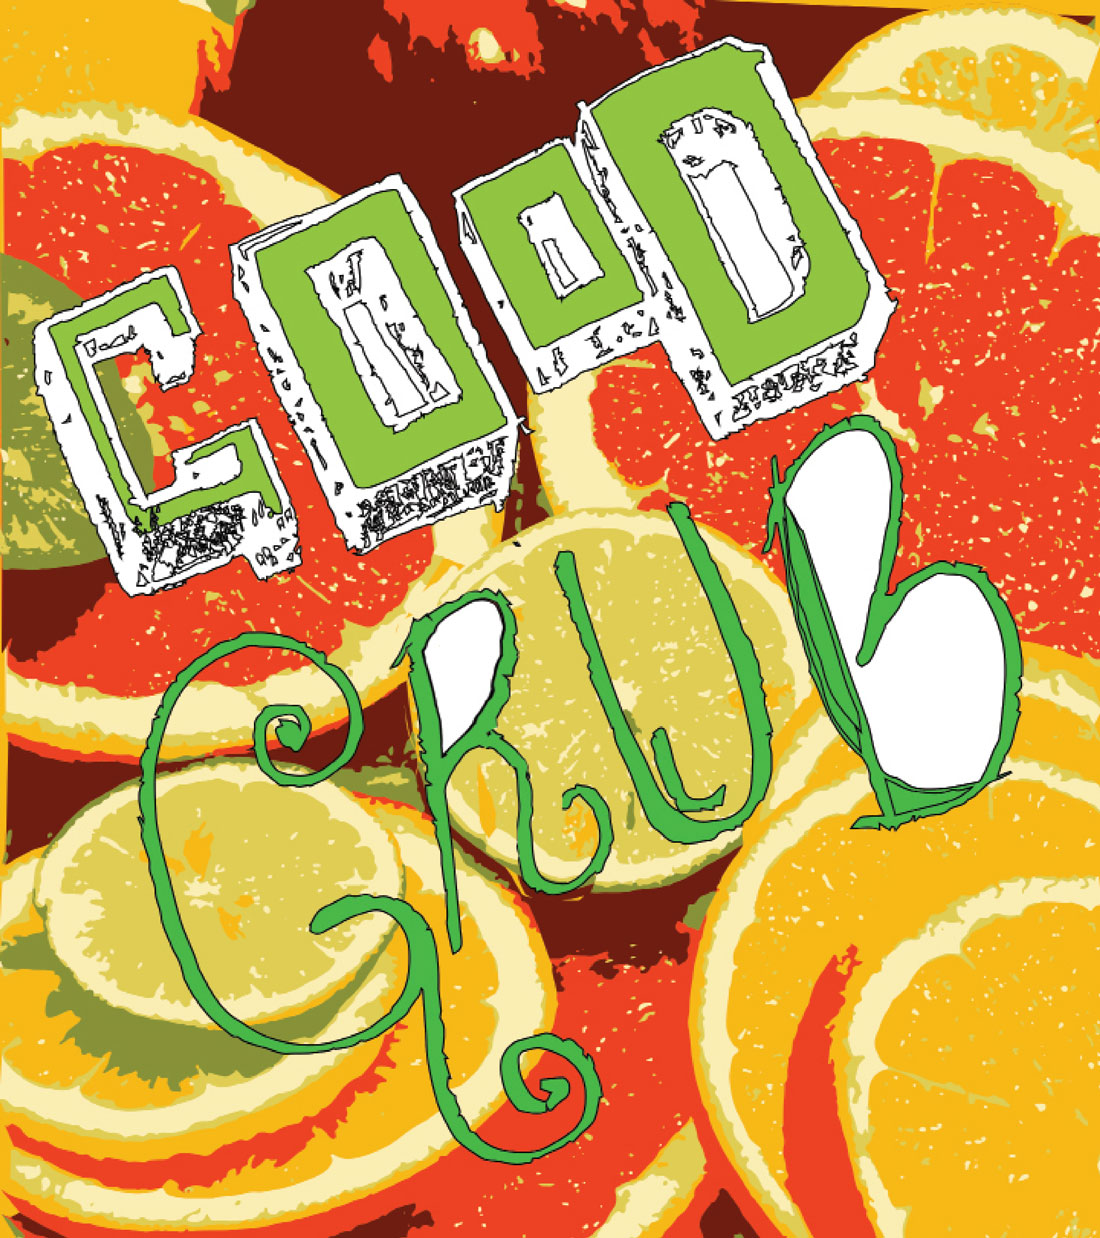 Good Grub cover design winner and Art Institute student, Cathy Lincoln